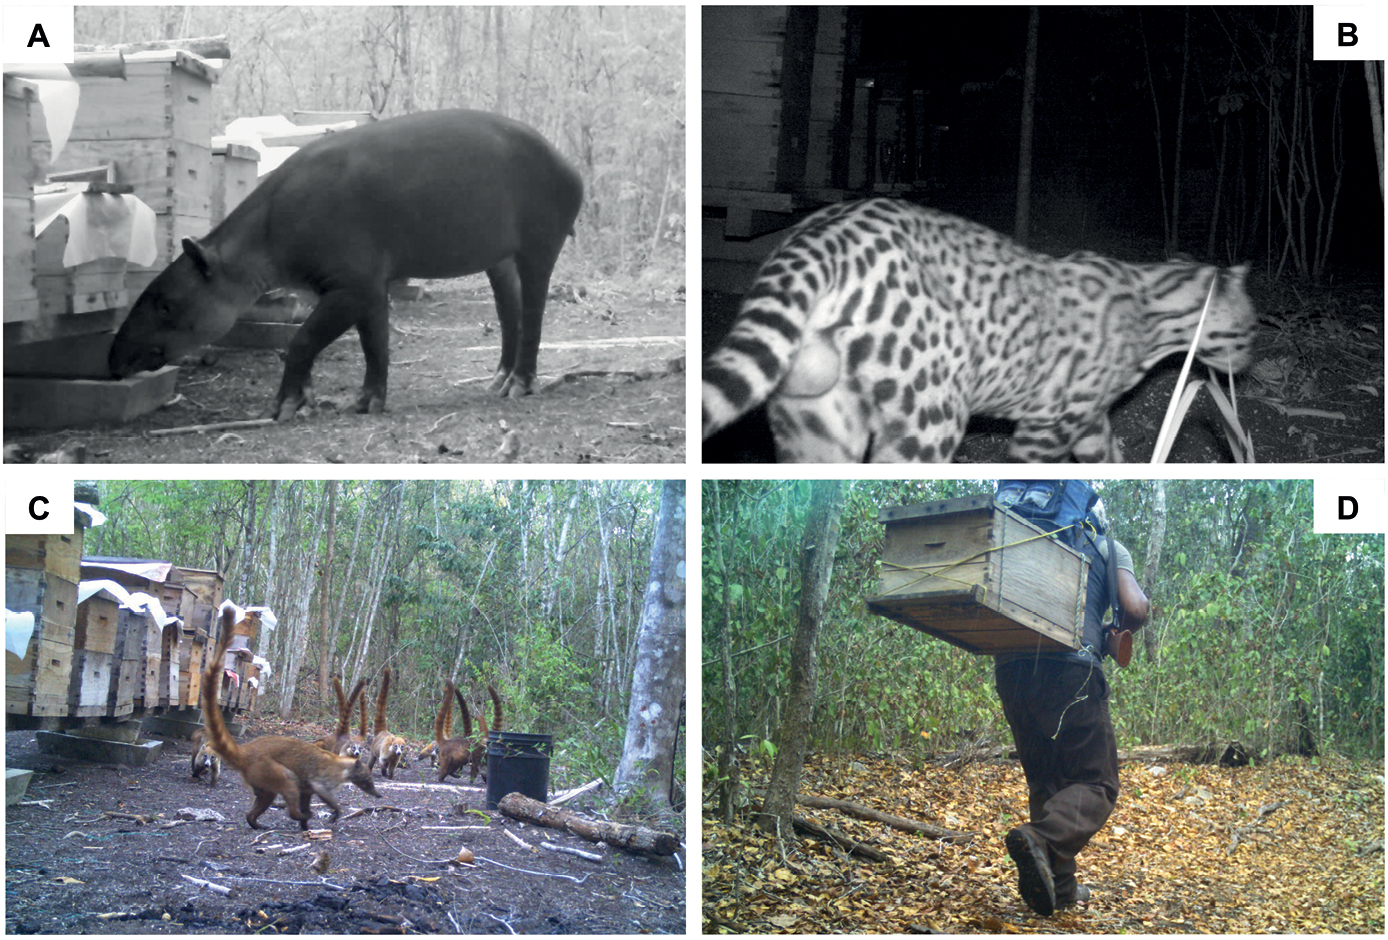 Human-wildlife conflicts and drought in the greater Calakmul Region,  Mexico: implications for tapir conservation